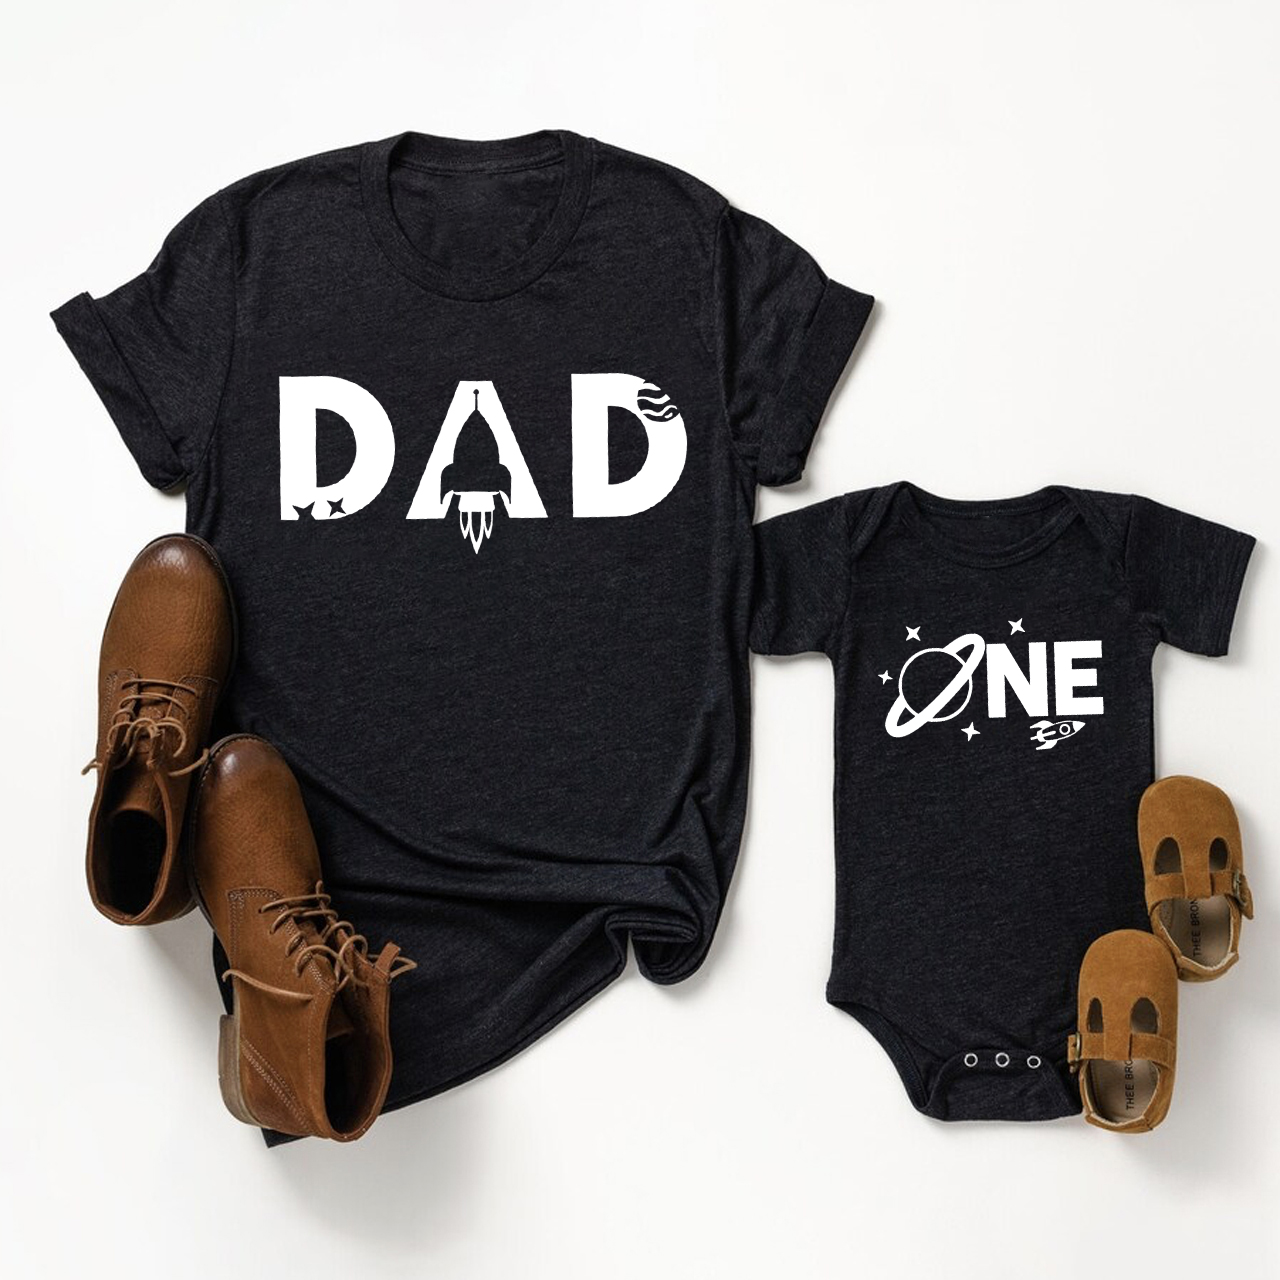 Personalized Space Themed  Matching Tees For Dad & Me